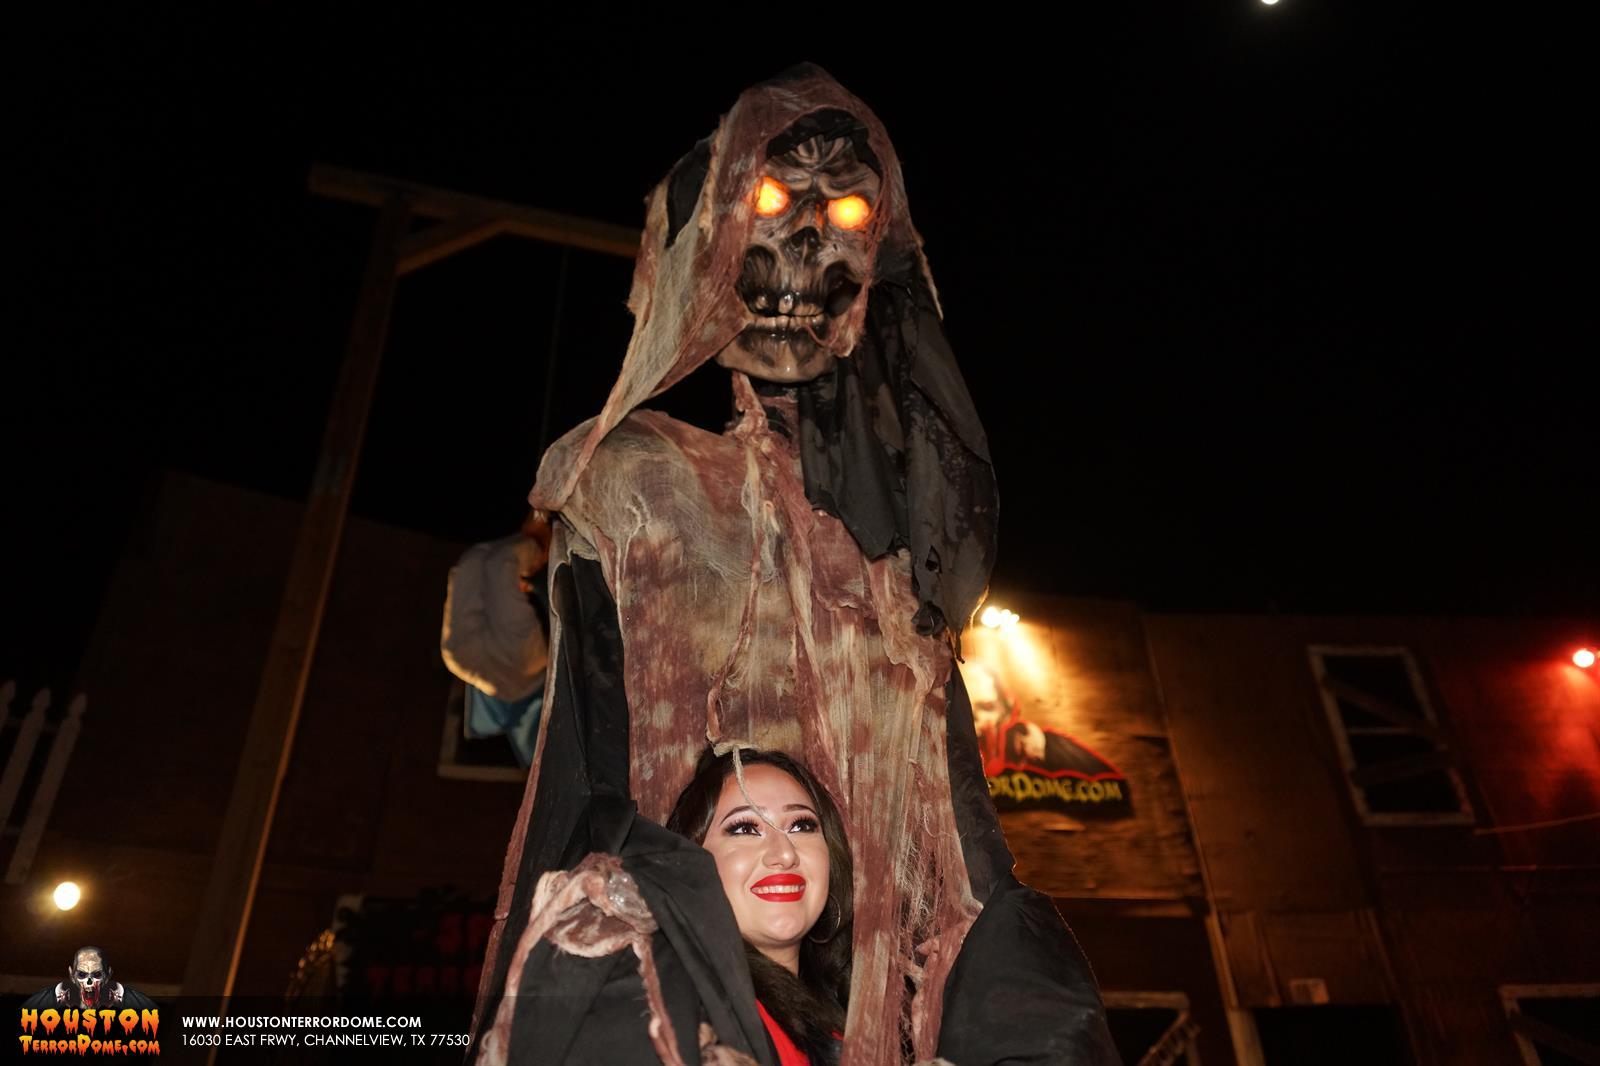 3rd Friday in October at the Haunt